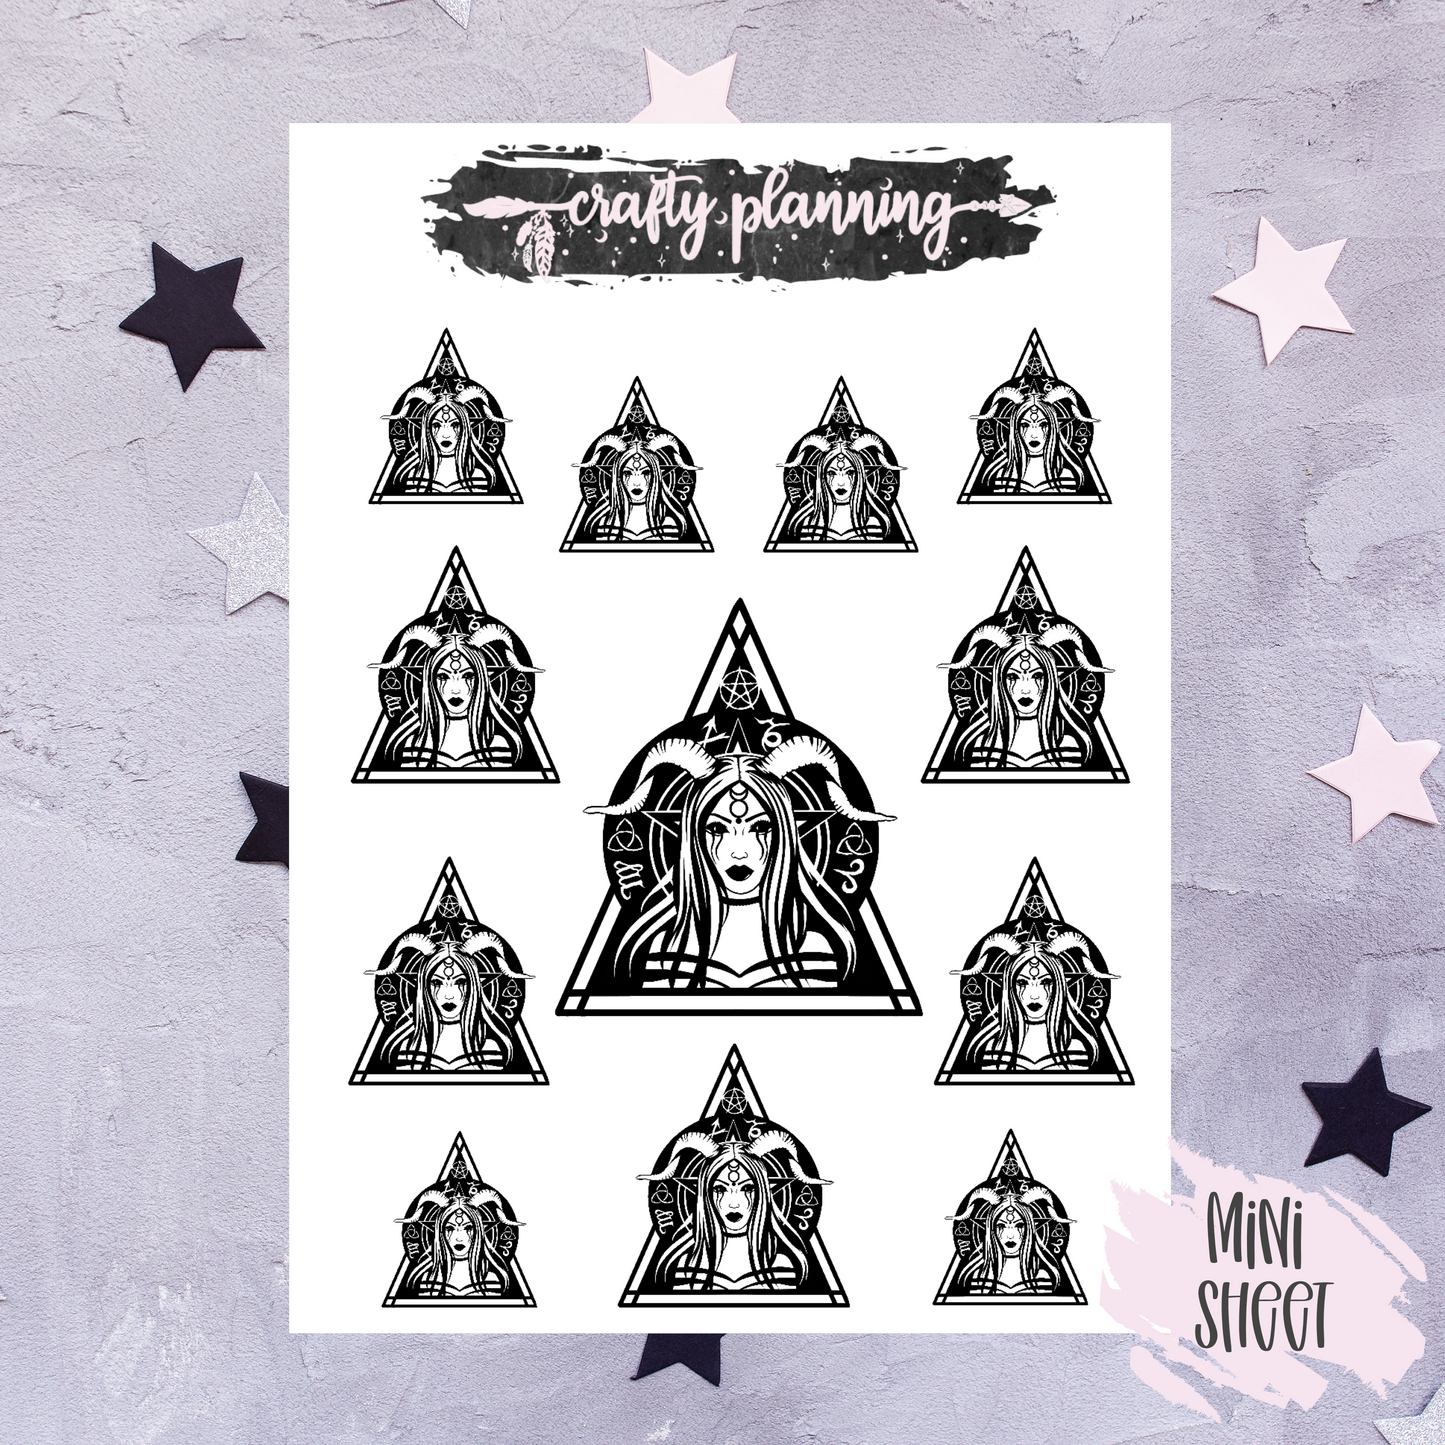 Witchcraft Stickers, Gothic Stickers, Planner Stickers, Esoteric Stickers, Dark & Moody, Pagan Stickers, Triangle Witch